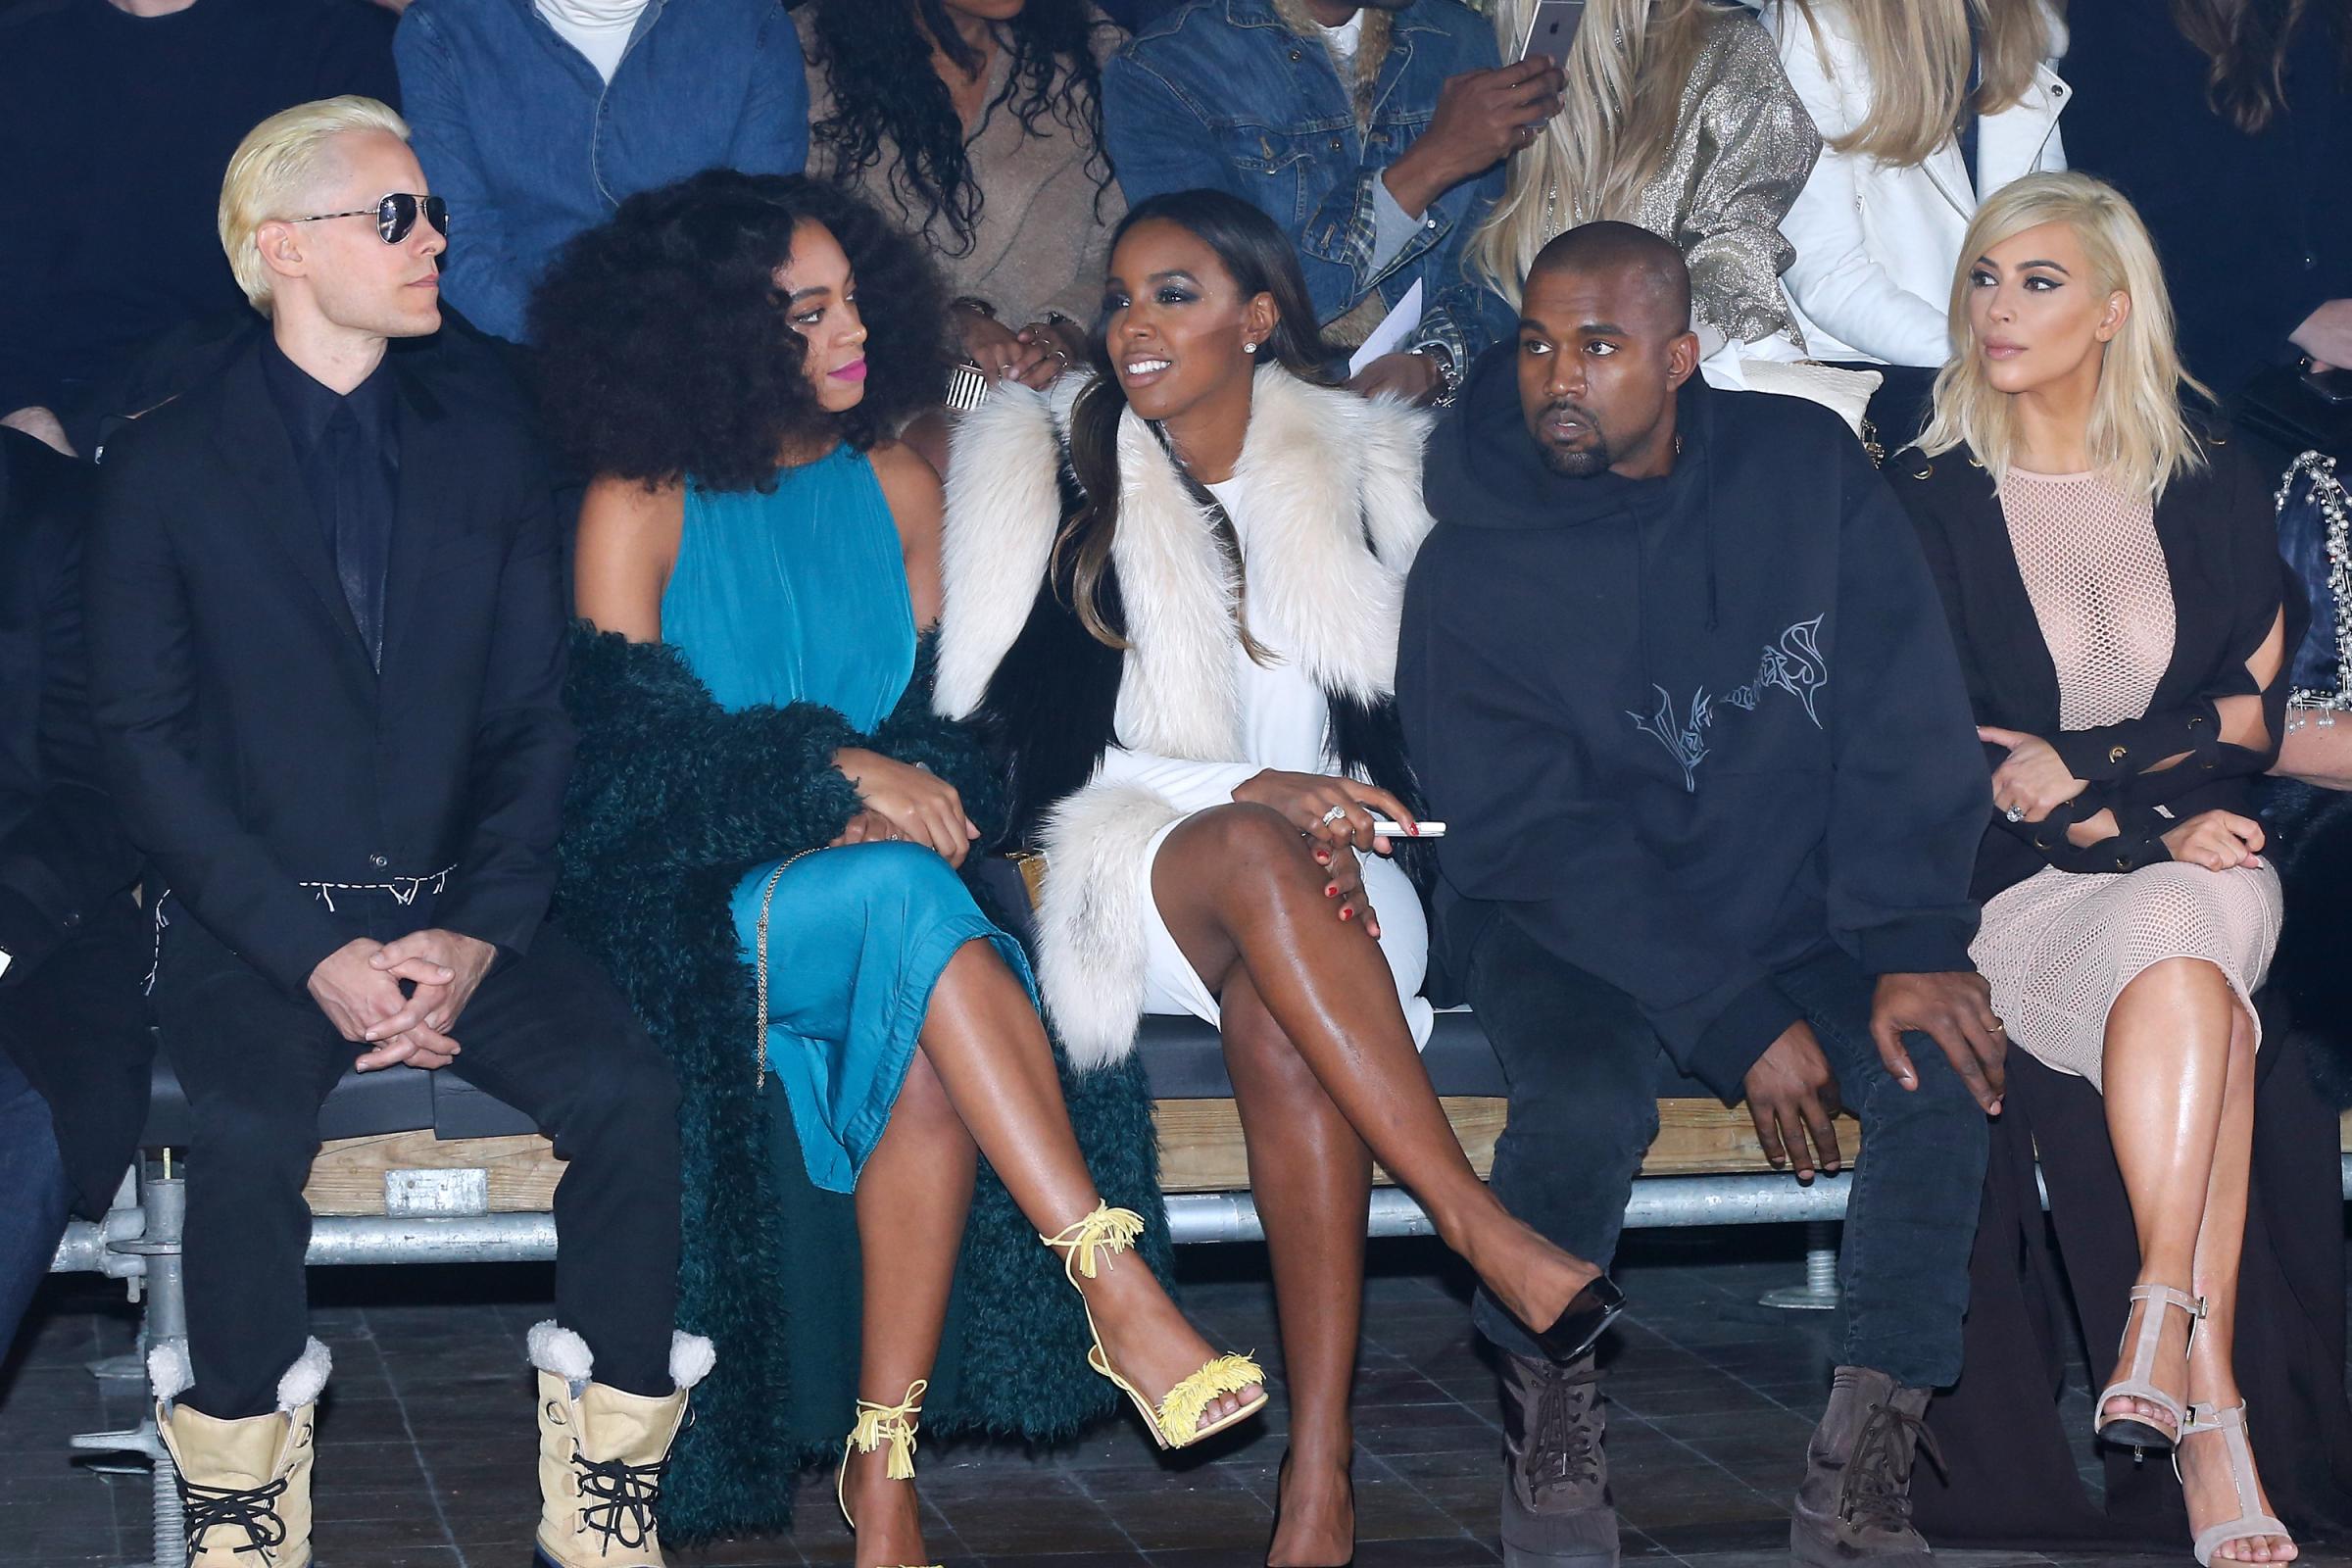 Jared Leto, Solange Knowles, Kelly Rowland, Kanye West and Kim Kardashian attend the Lanvin Fall/Winter 2015 fashion show.